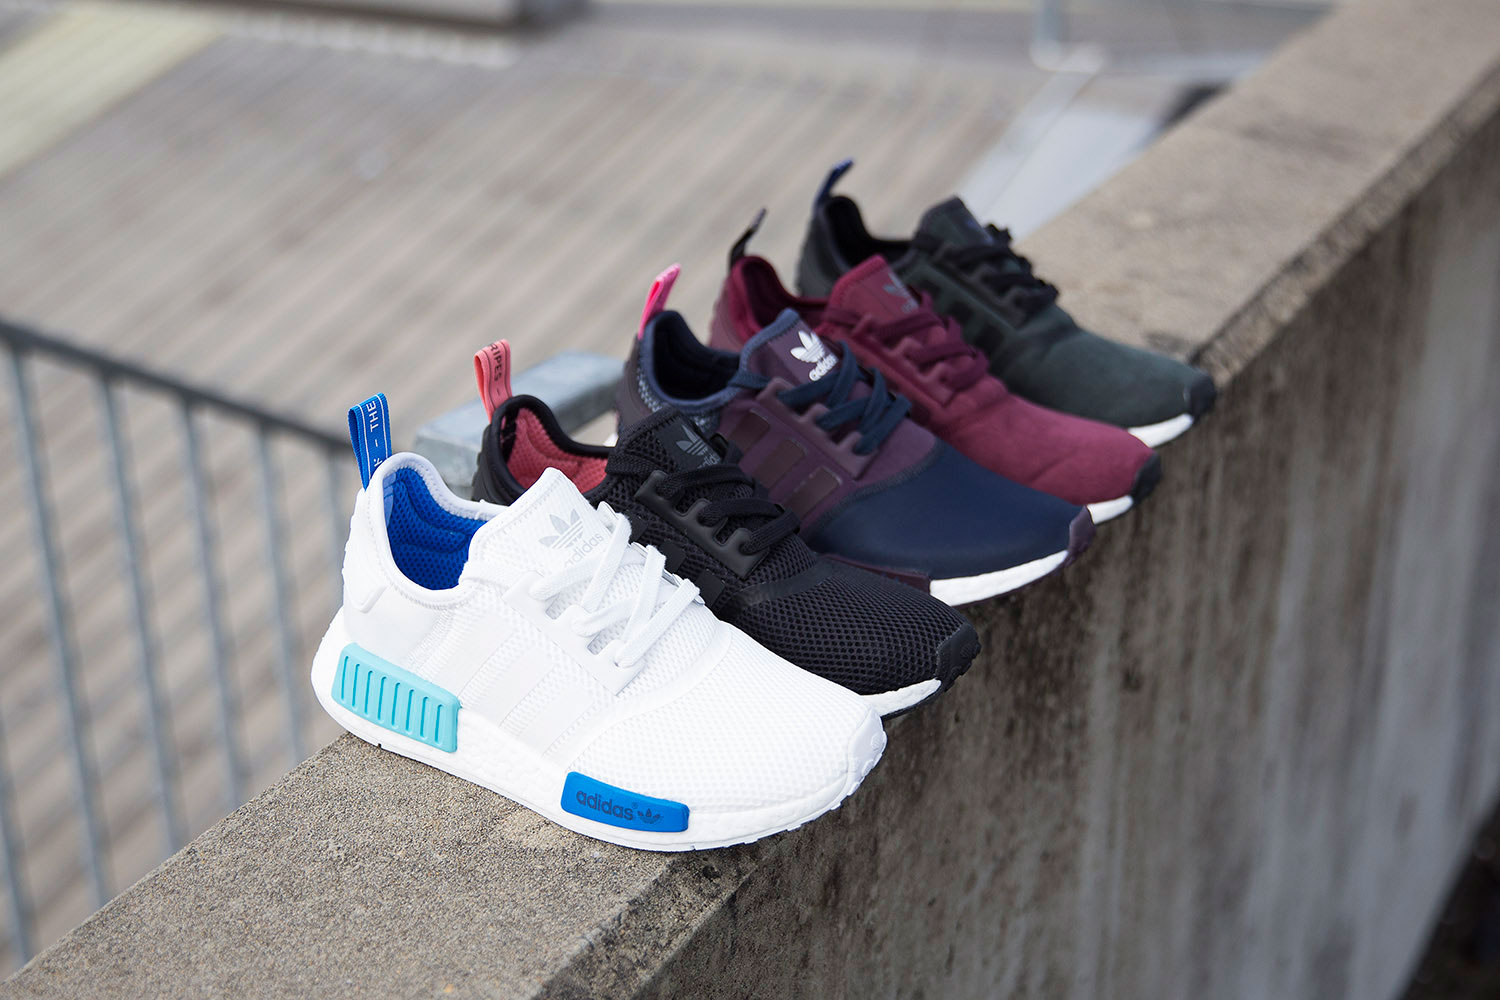 NMD styles coming to Hype DC this week 